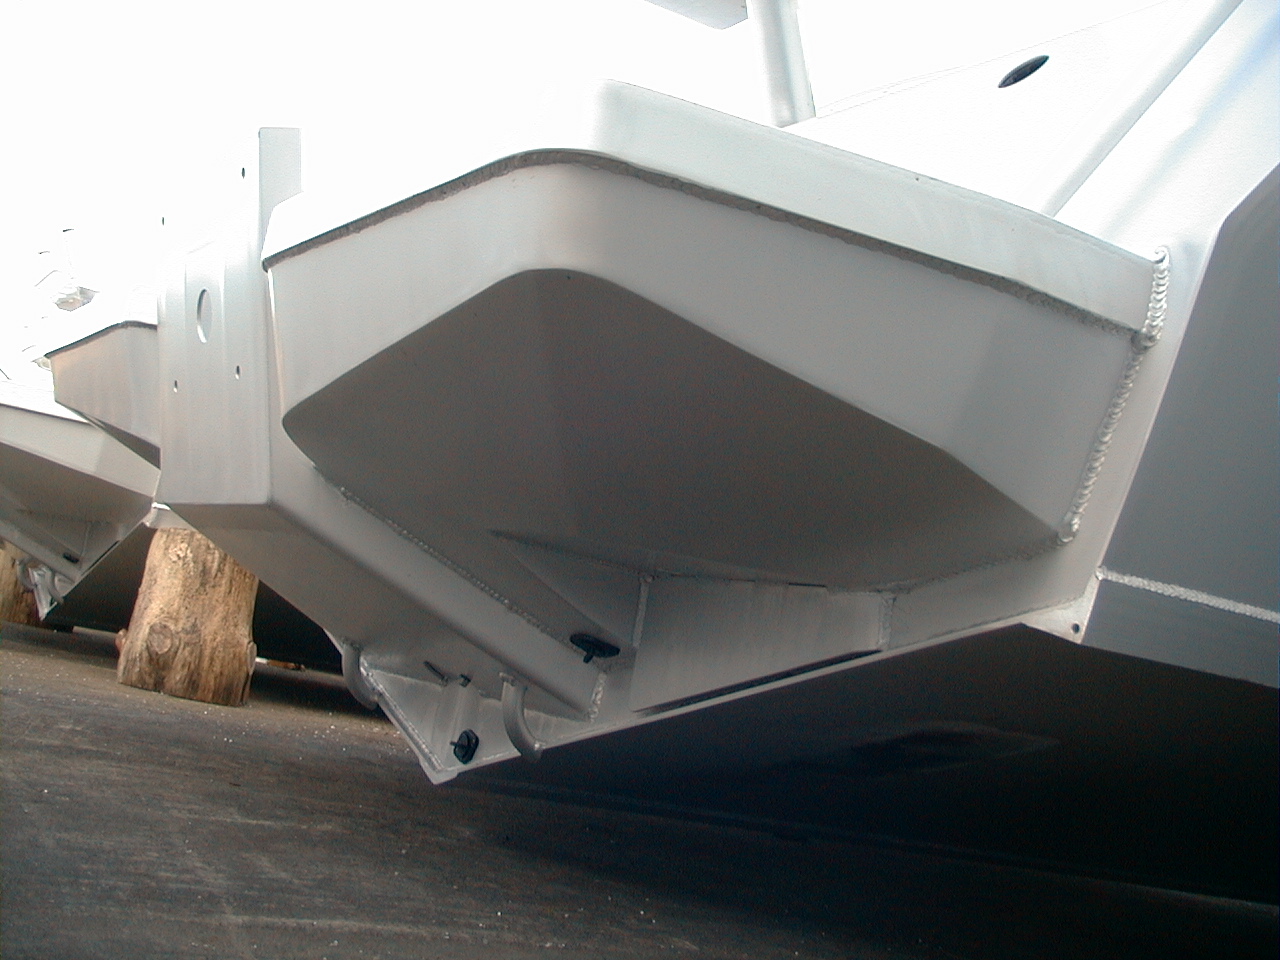 AMF Boats - Alloy Boat Builders